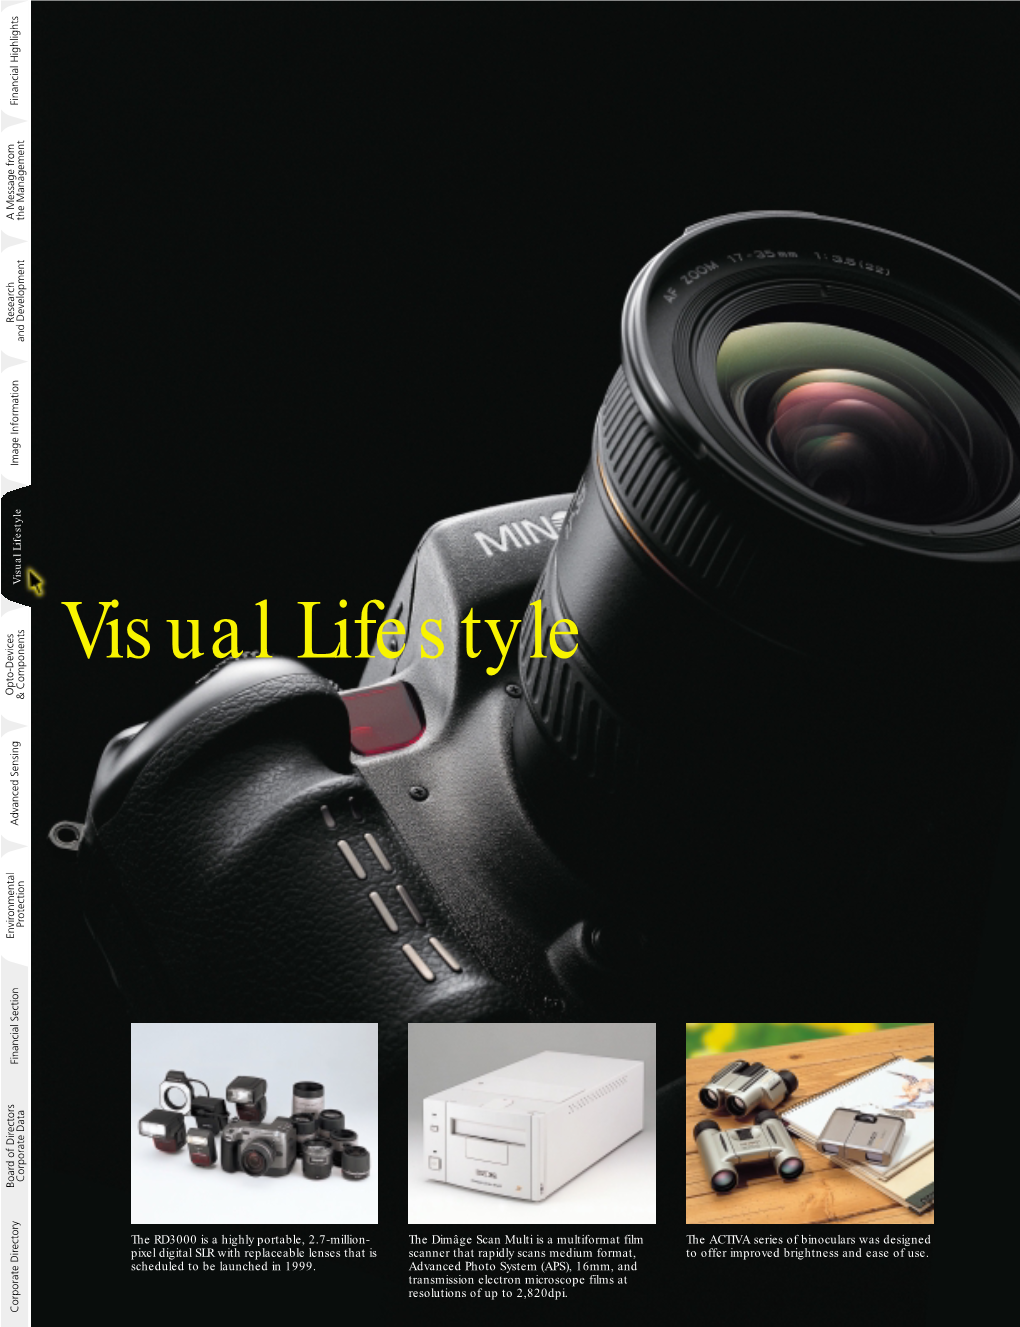 Visual Lifestyle and Development the Management Visual Lifestyle Scheduled Tobelaunched In1999